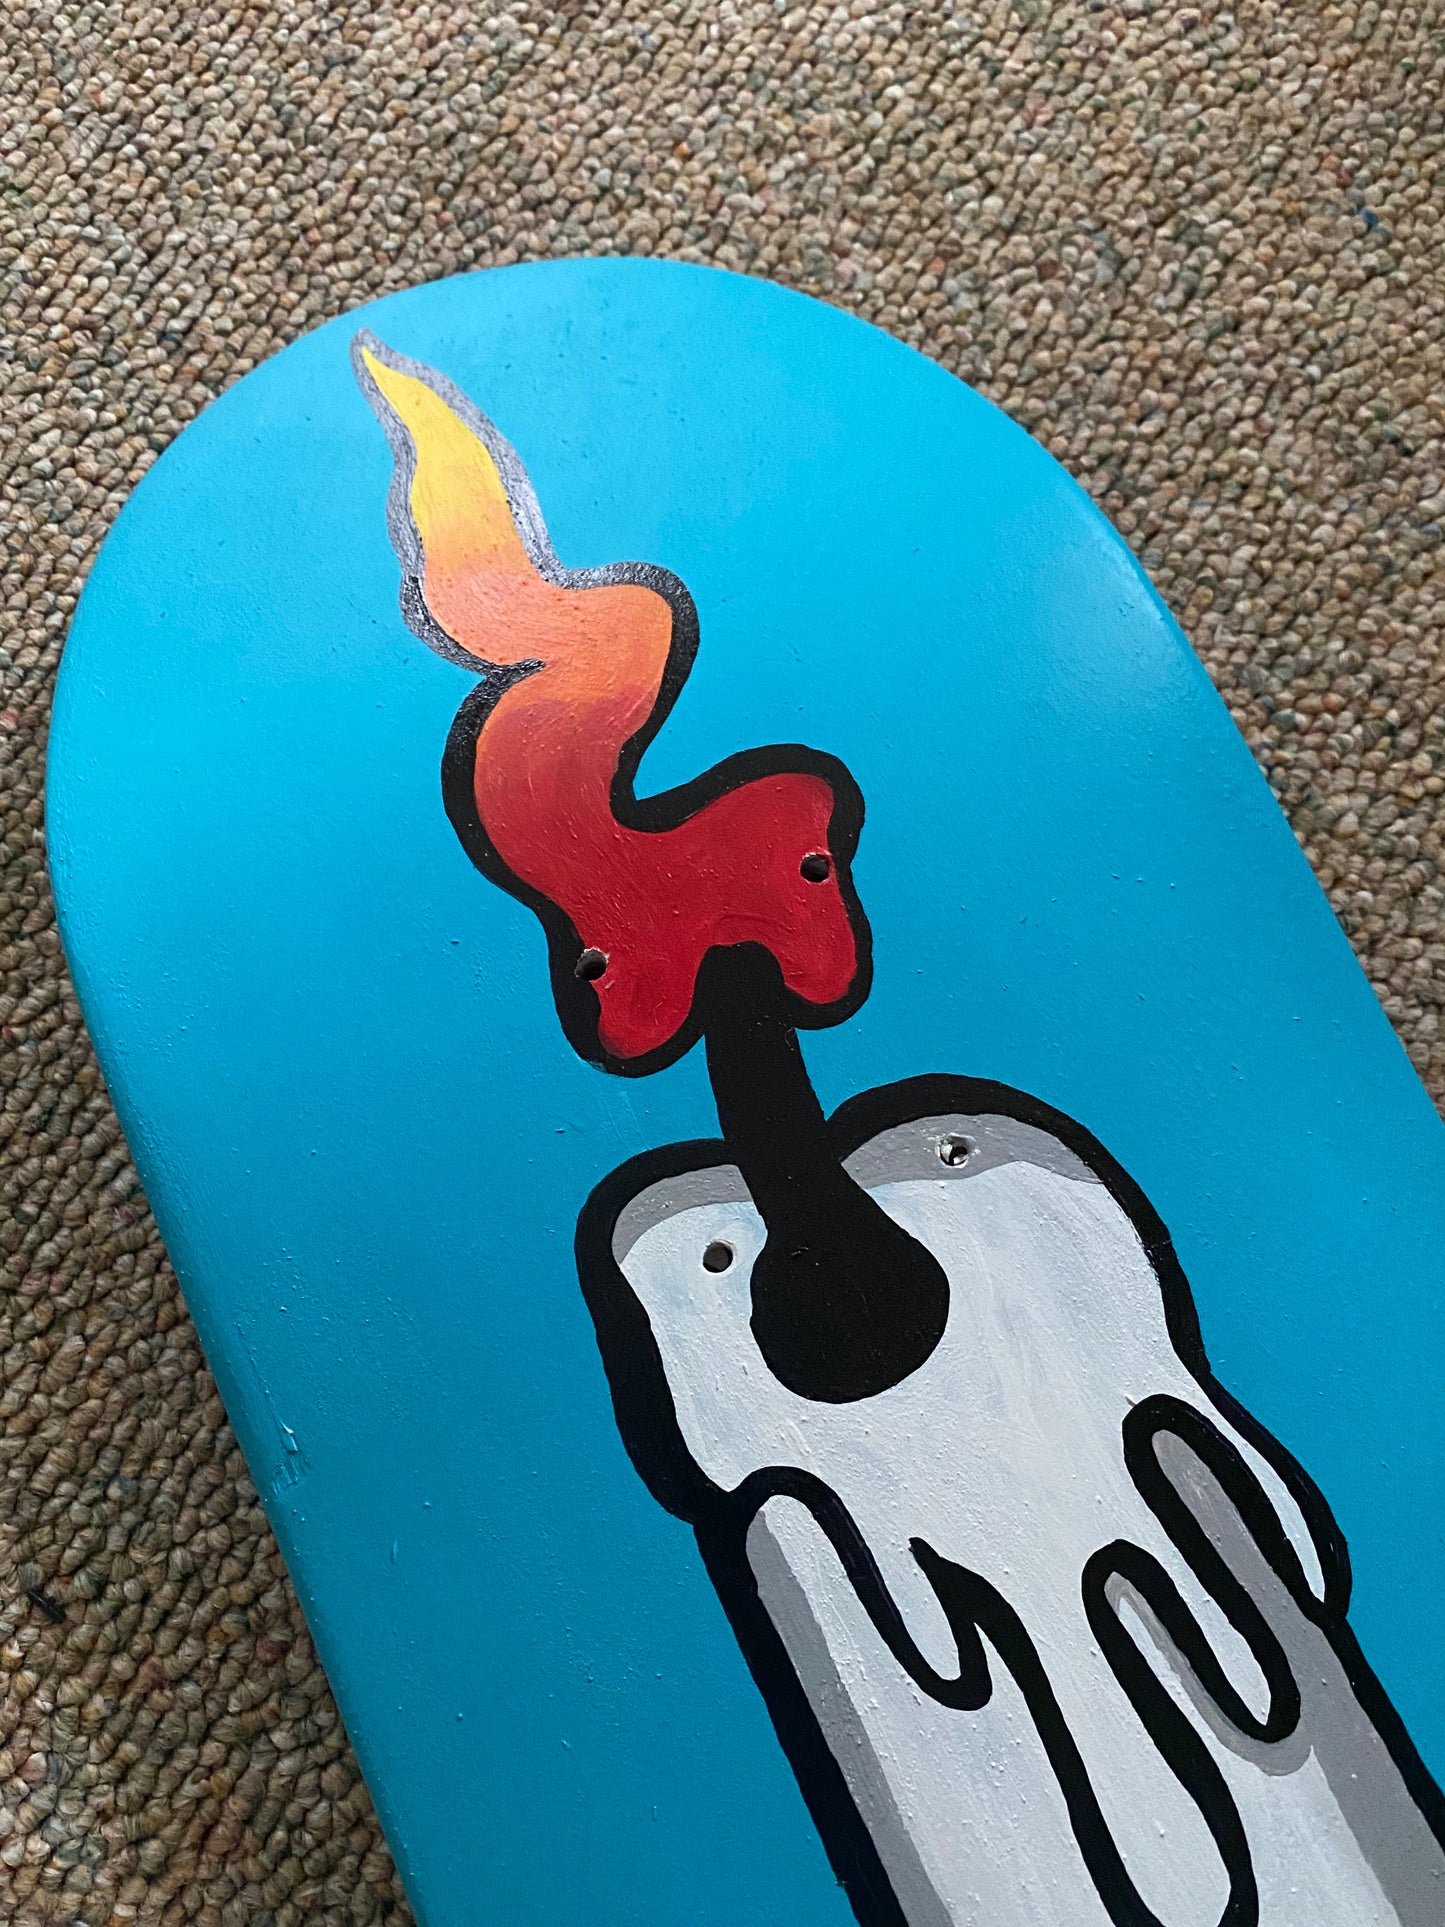 “Burning The Wick At Both Ends” 8.0 Skateboard Deck